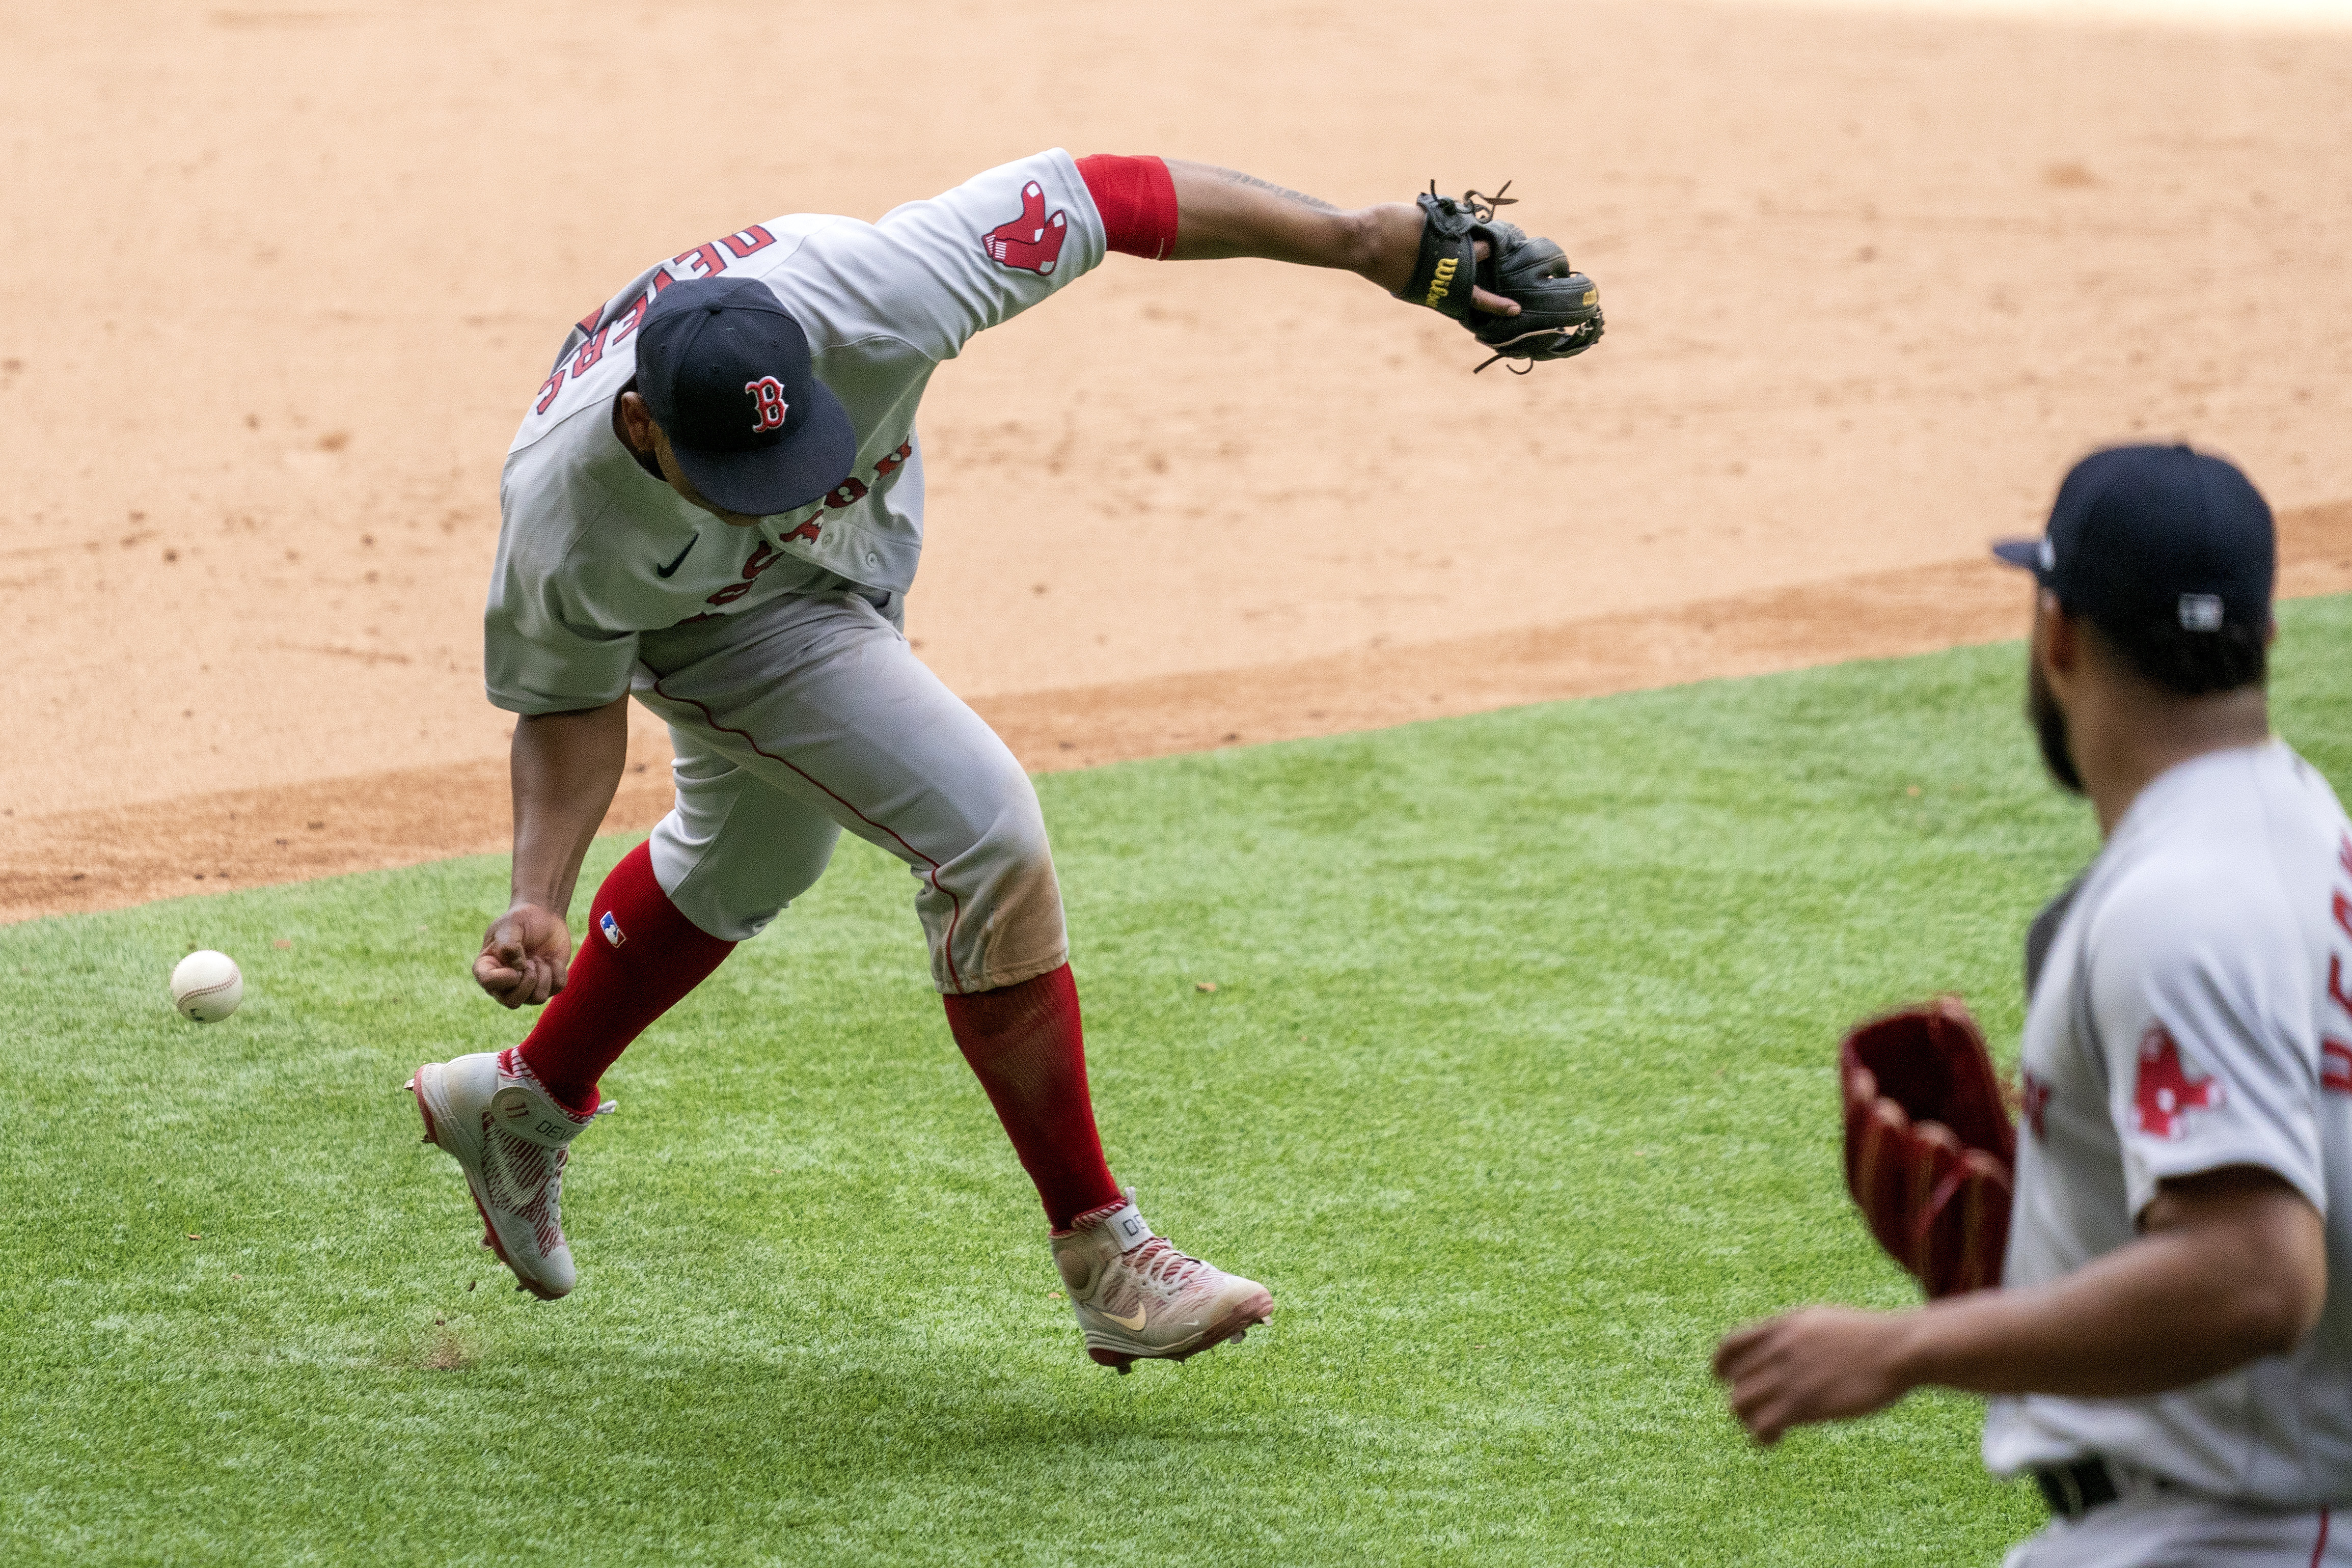 Brock Holt leads comeback win over Boston Red Sox who blow lead in eighth  after Adam Ottavino walks leadoff batter on five pitches 